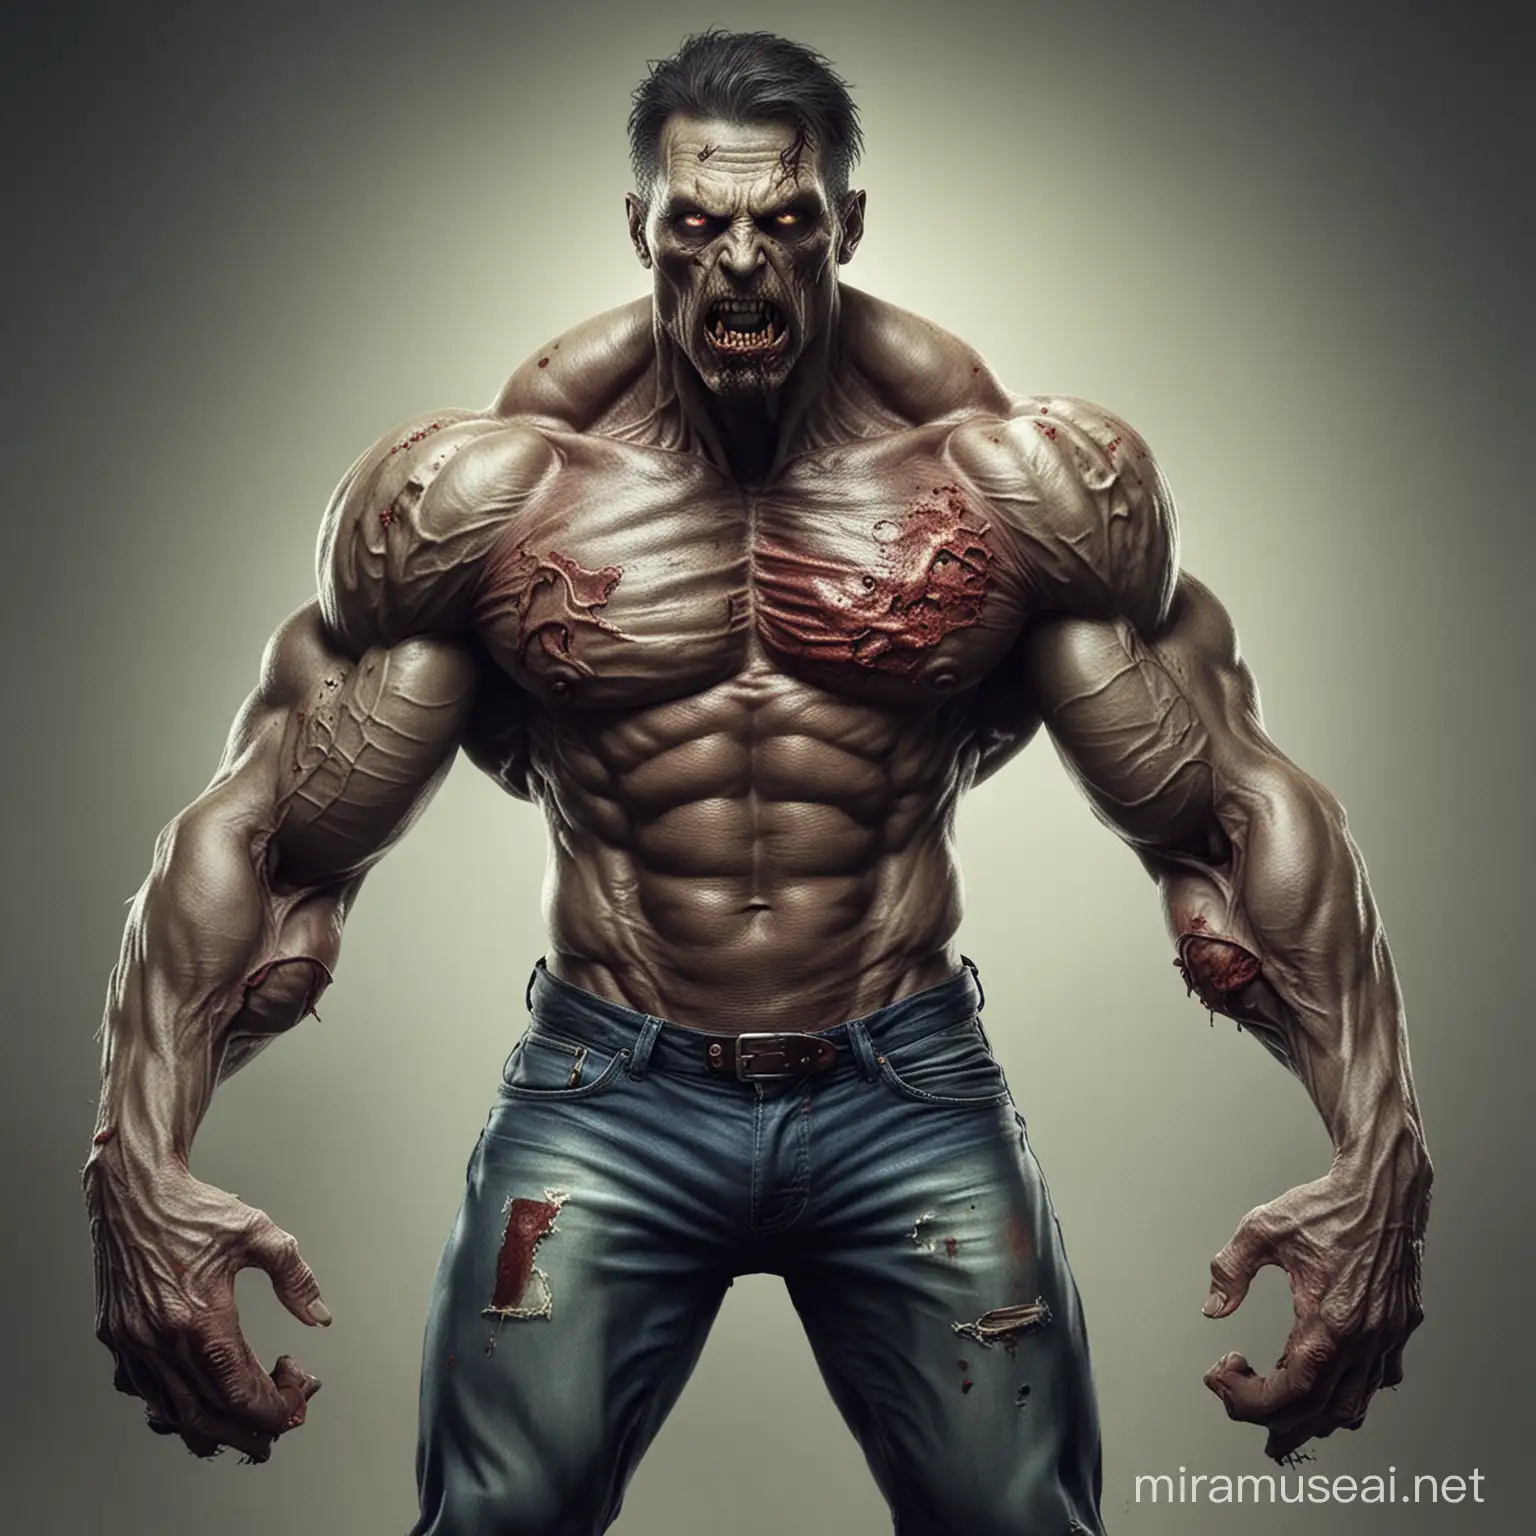 Powerful Zombie with Bulging Muscles Ready for Action